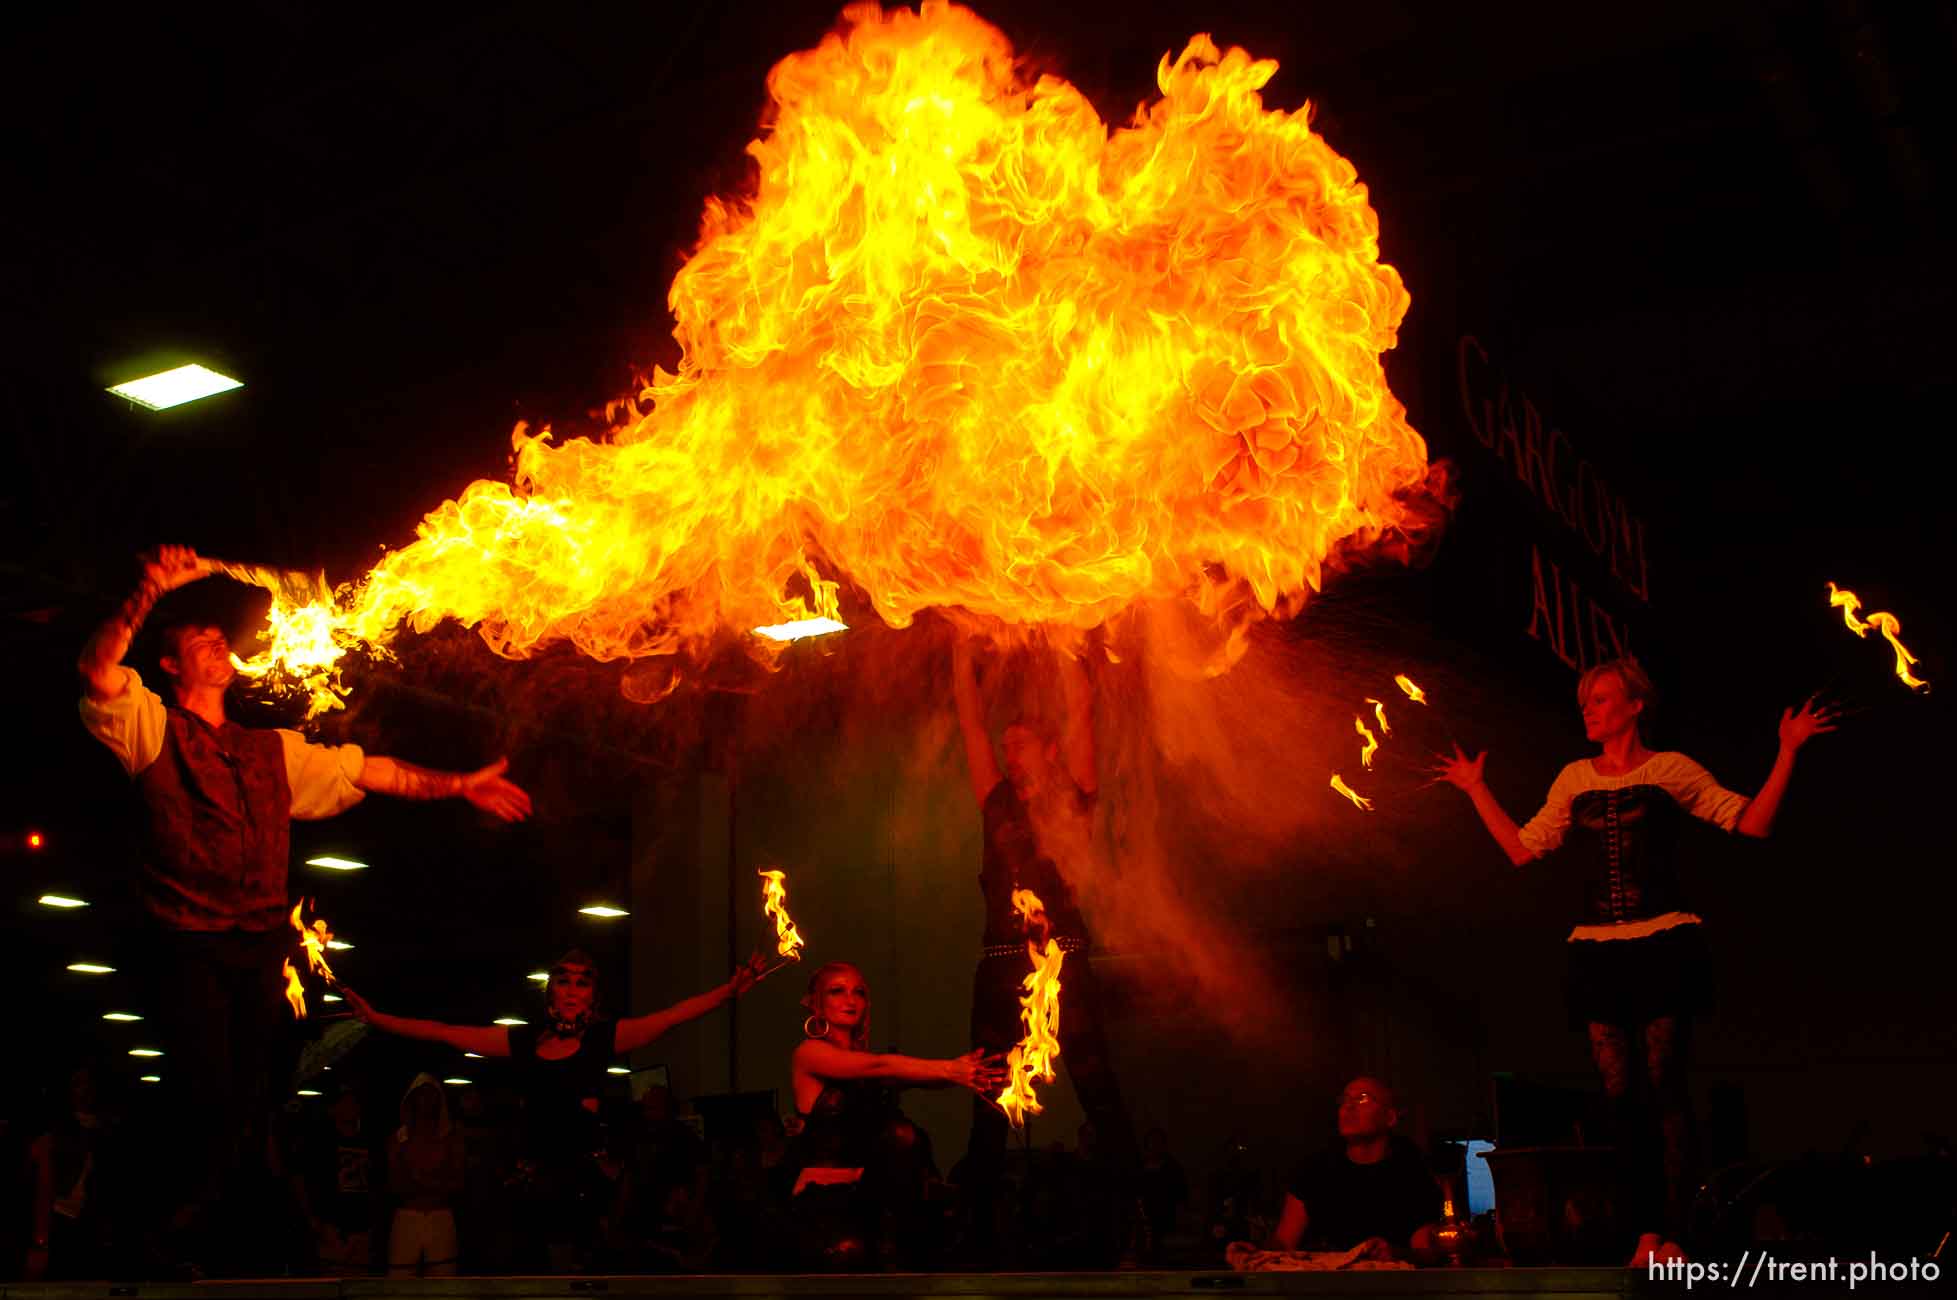 Trent Nelson  |  The Salt Lake Tribune
Moki breathes fire while performing with Voodoo Productions at FantasyCon, held at the Salt Palace Convention Center in Salt Lake City, Saturday July 5, 2014.